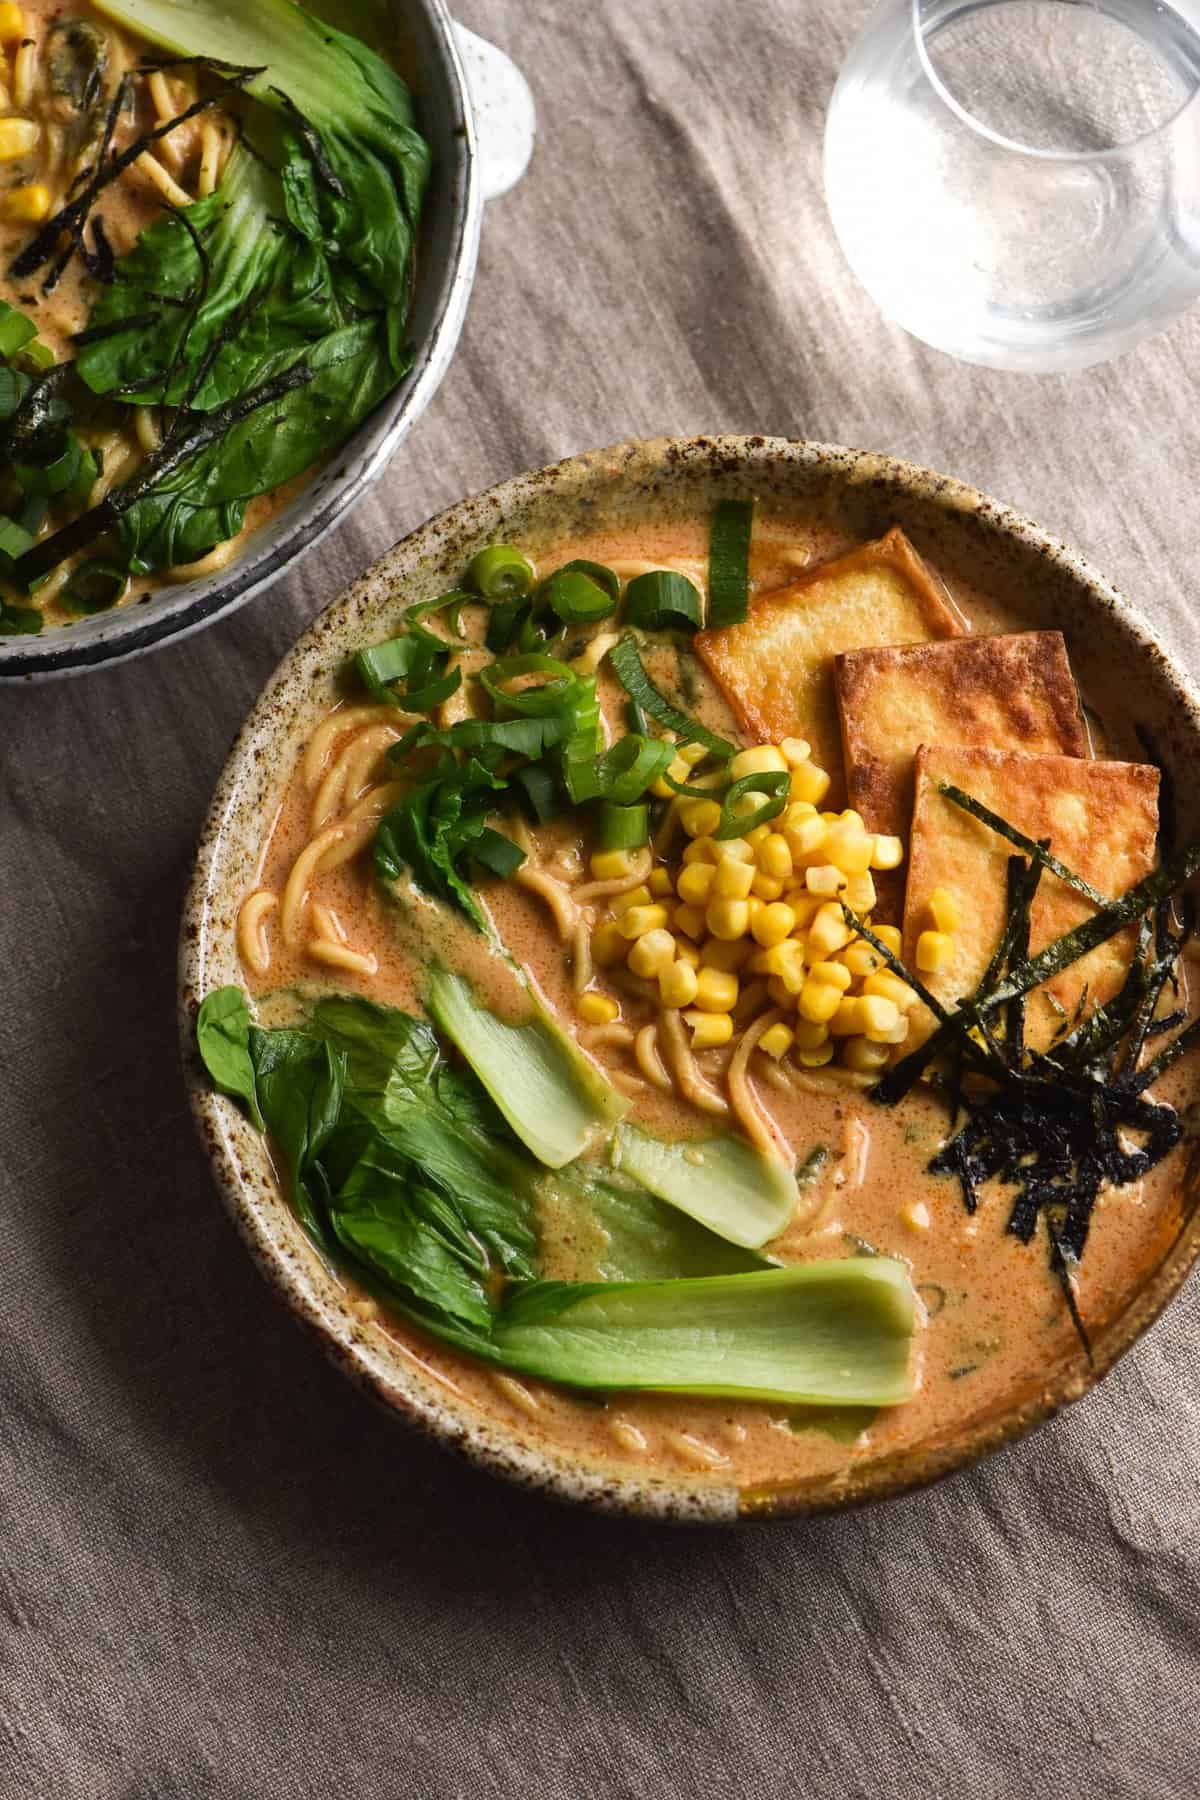 An aerial view of two bowls of FODMAP friendly, vegetarian or vegan and gluten free ramen. The bowls sit on a beige linen tea towel and a glass of water sits in the top right corner. The ramen is topped with smoked tofu slices, corn, spring onion greens, sliced nori and pak choi